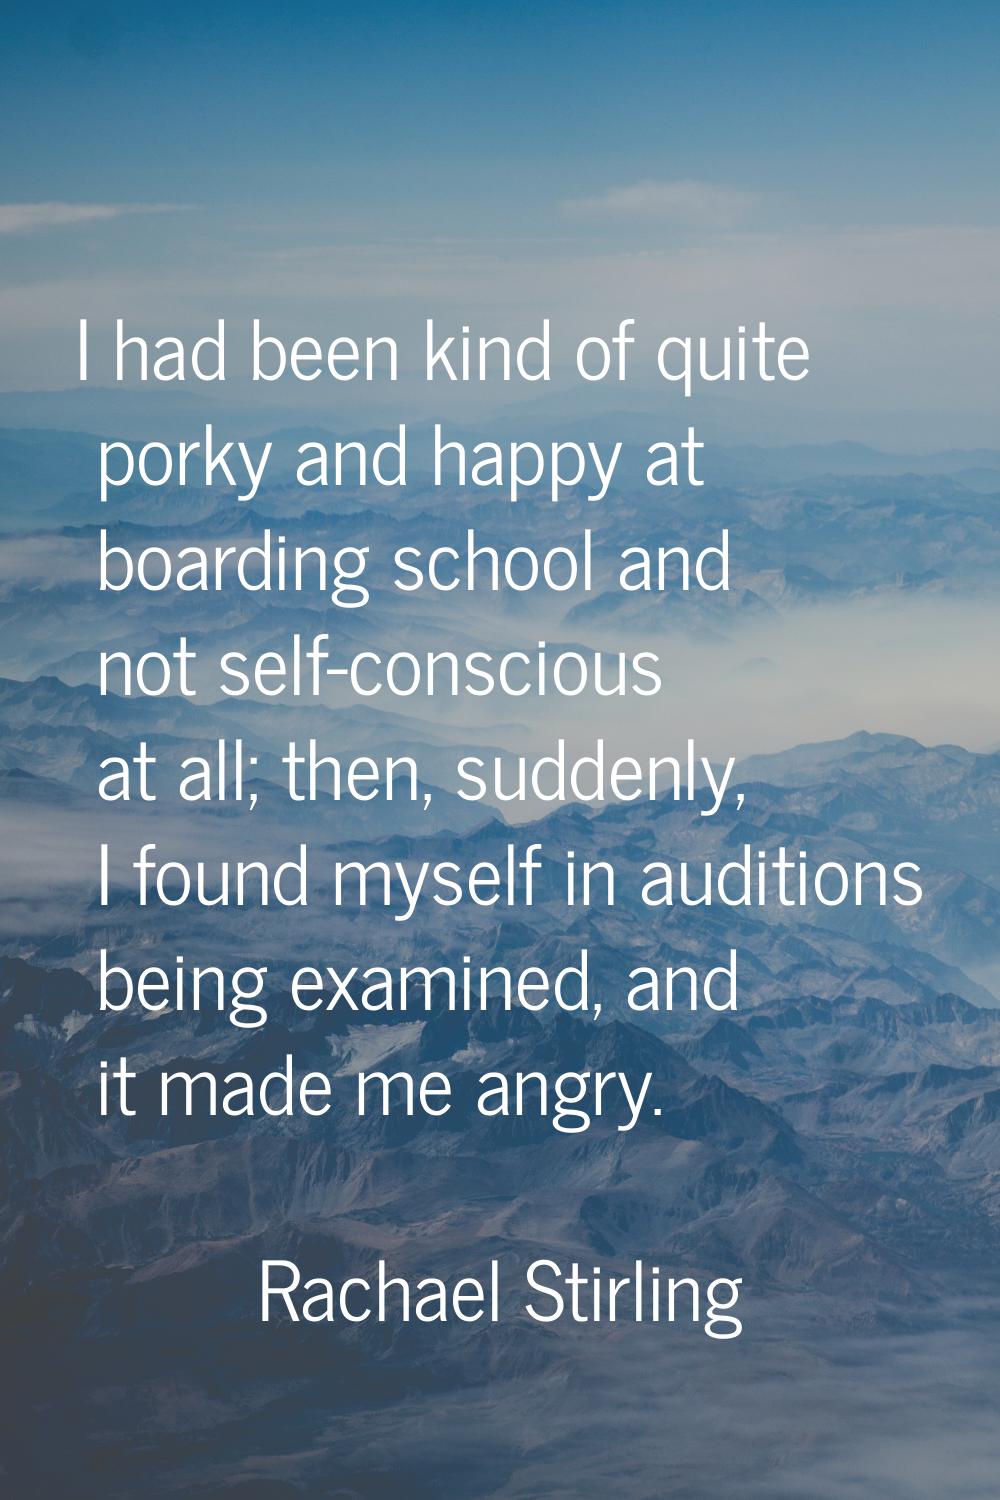 I had been kind of quite porky and happy at boarding school and not self-conscious at all; then, su